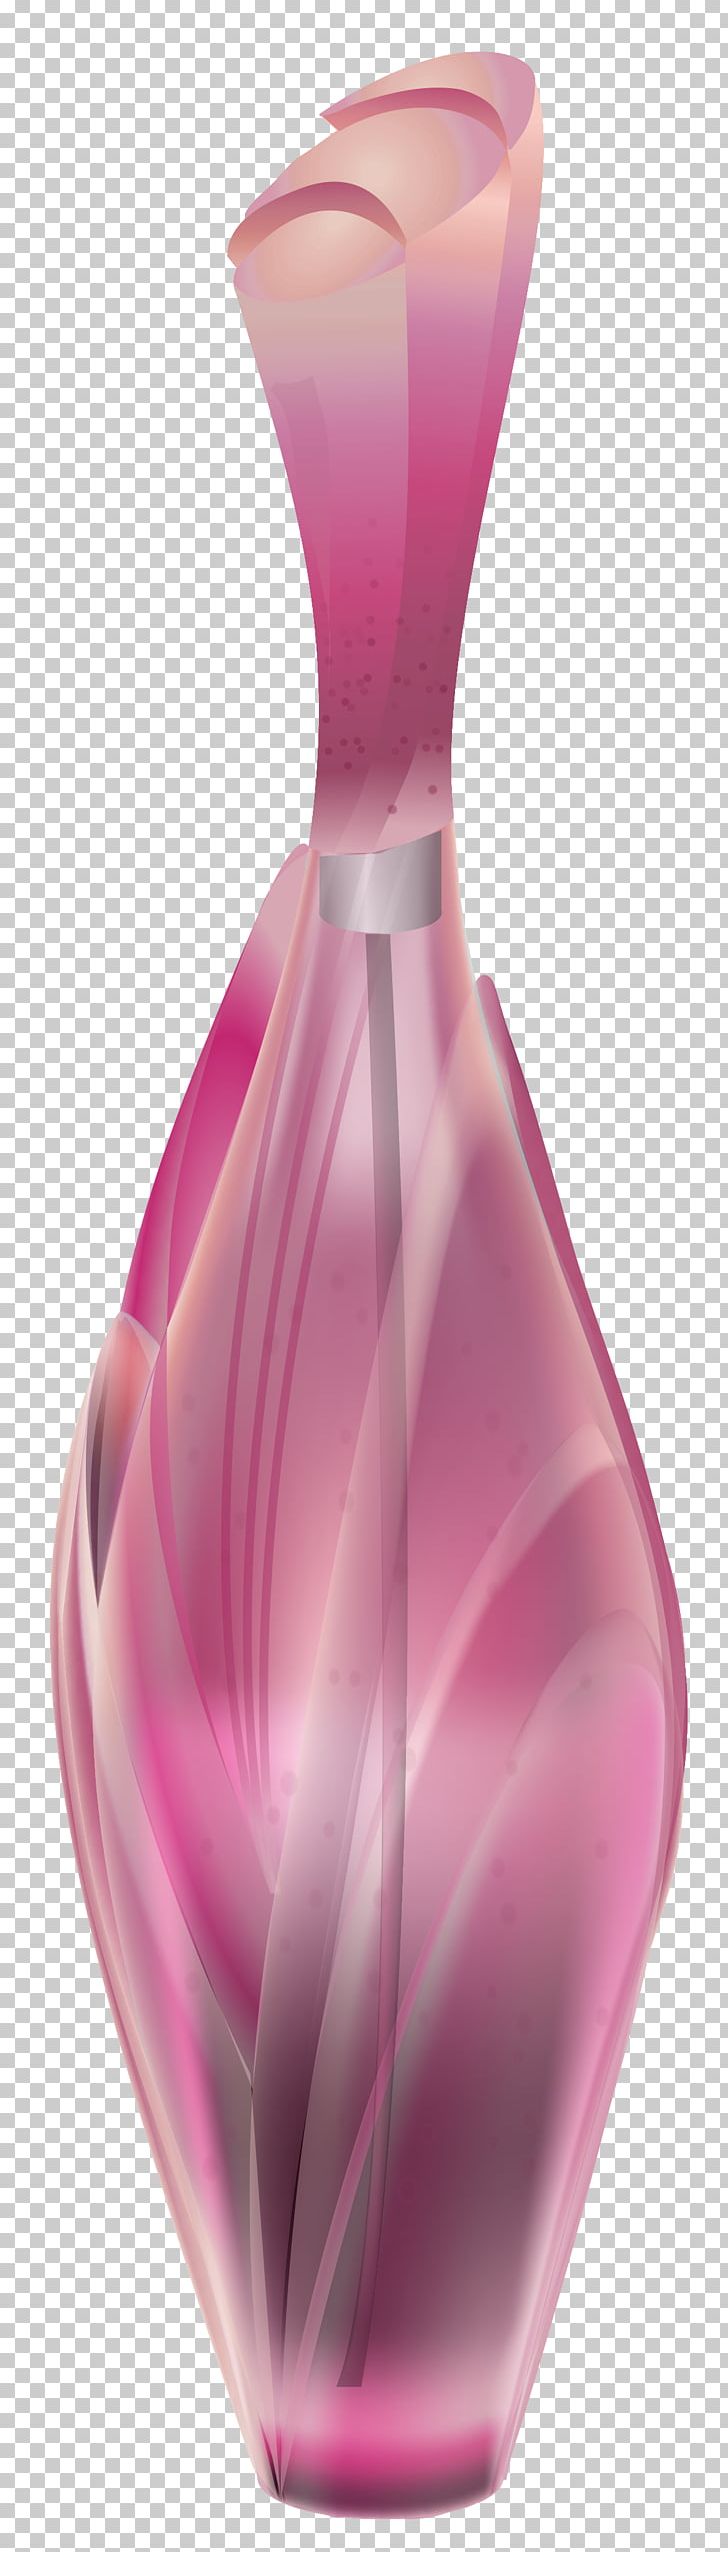 Perfume Bottle Chanel No. 5 PNG, Clipart, Bottle, Chanel, Chanel No. 5, Clipart, Cosmetic Free PNG Download